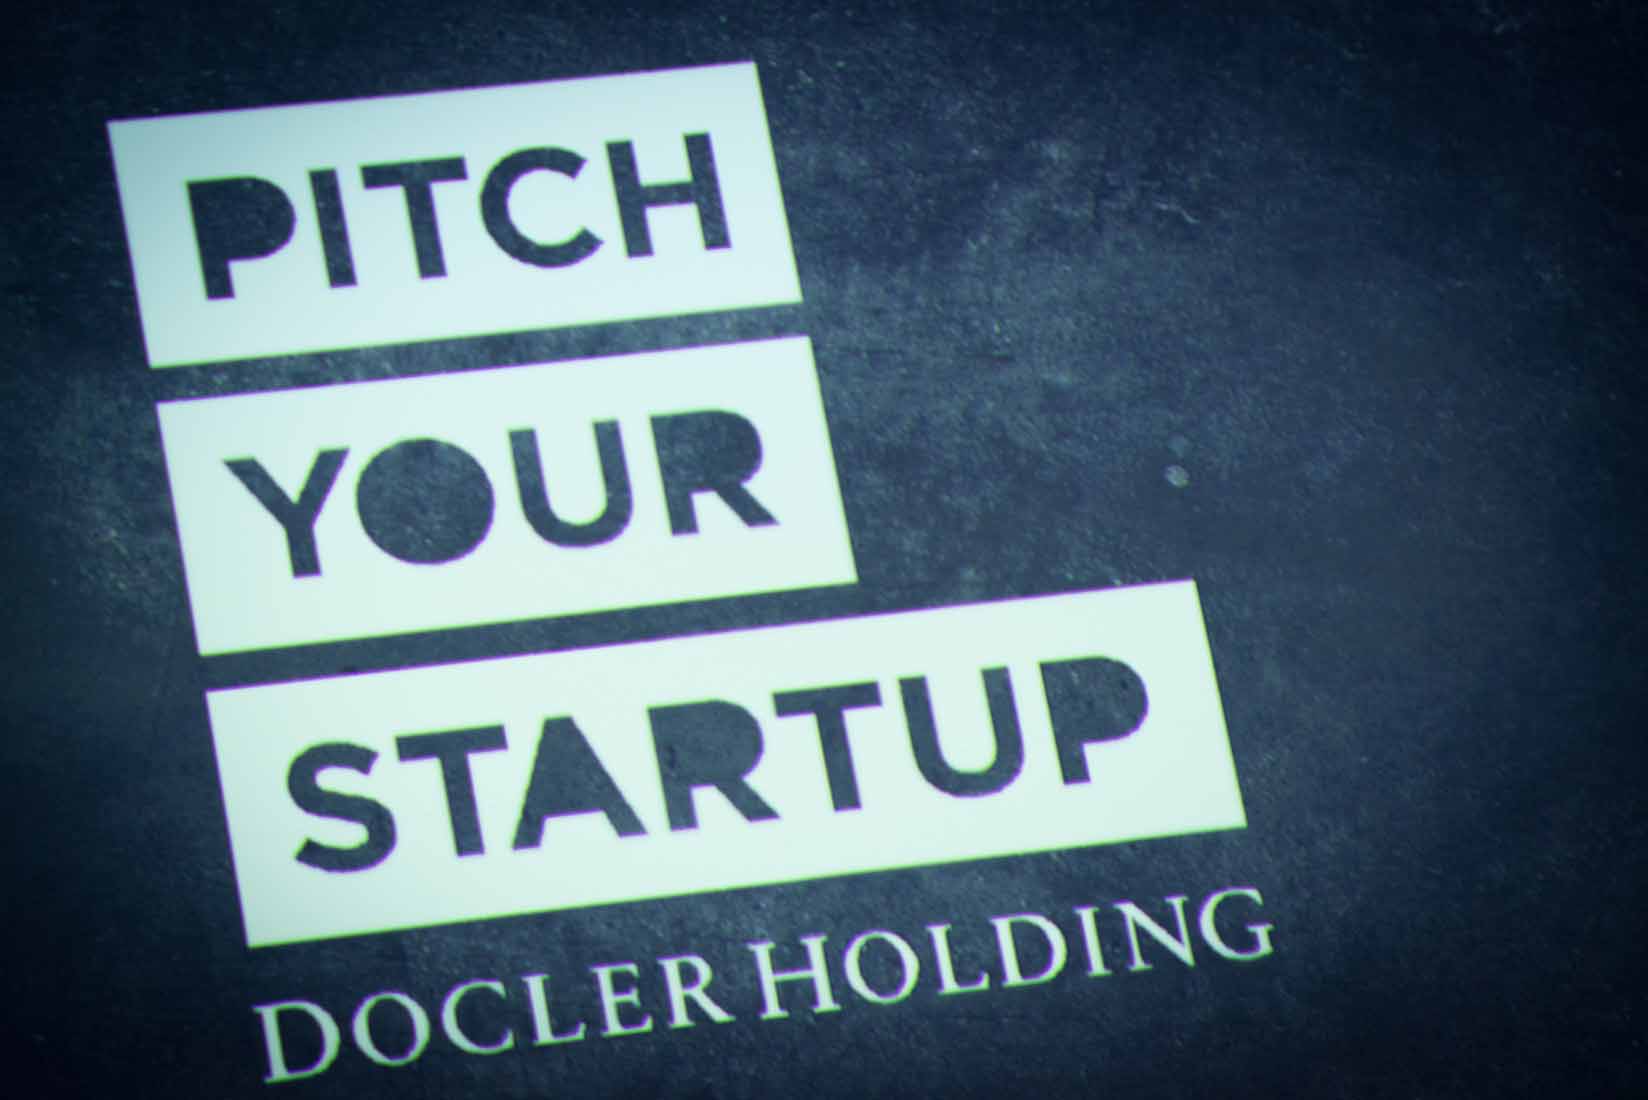 Pitch Your Startup 2017